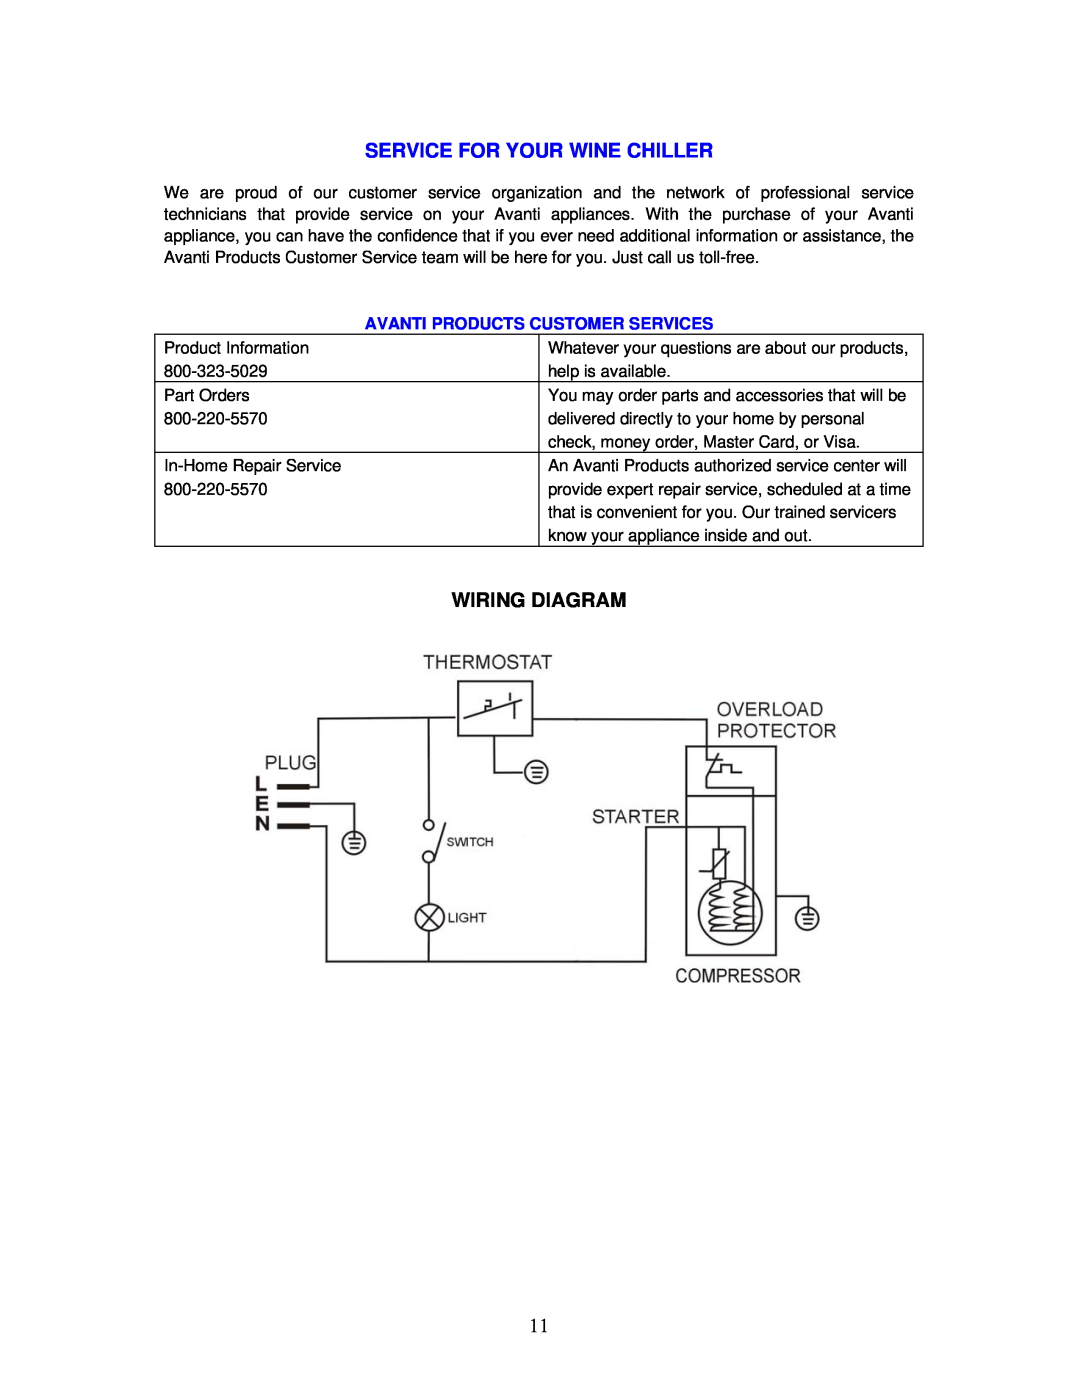 Avanti WC493B instruction manual Service For Your Wine Chiller, Wiring Diagram 